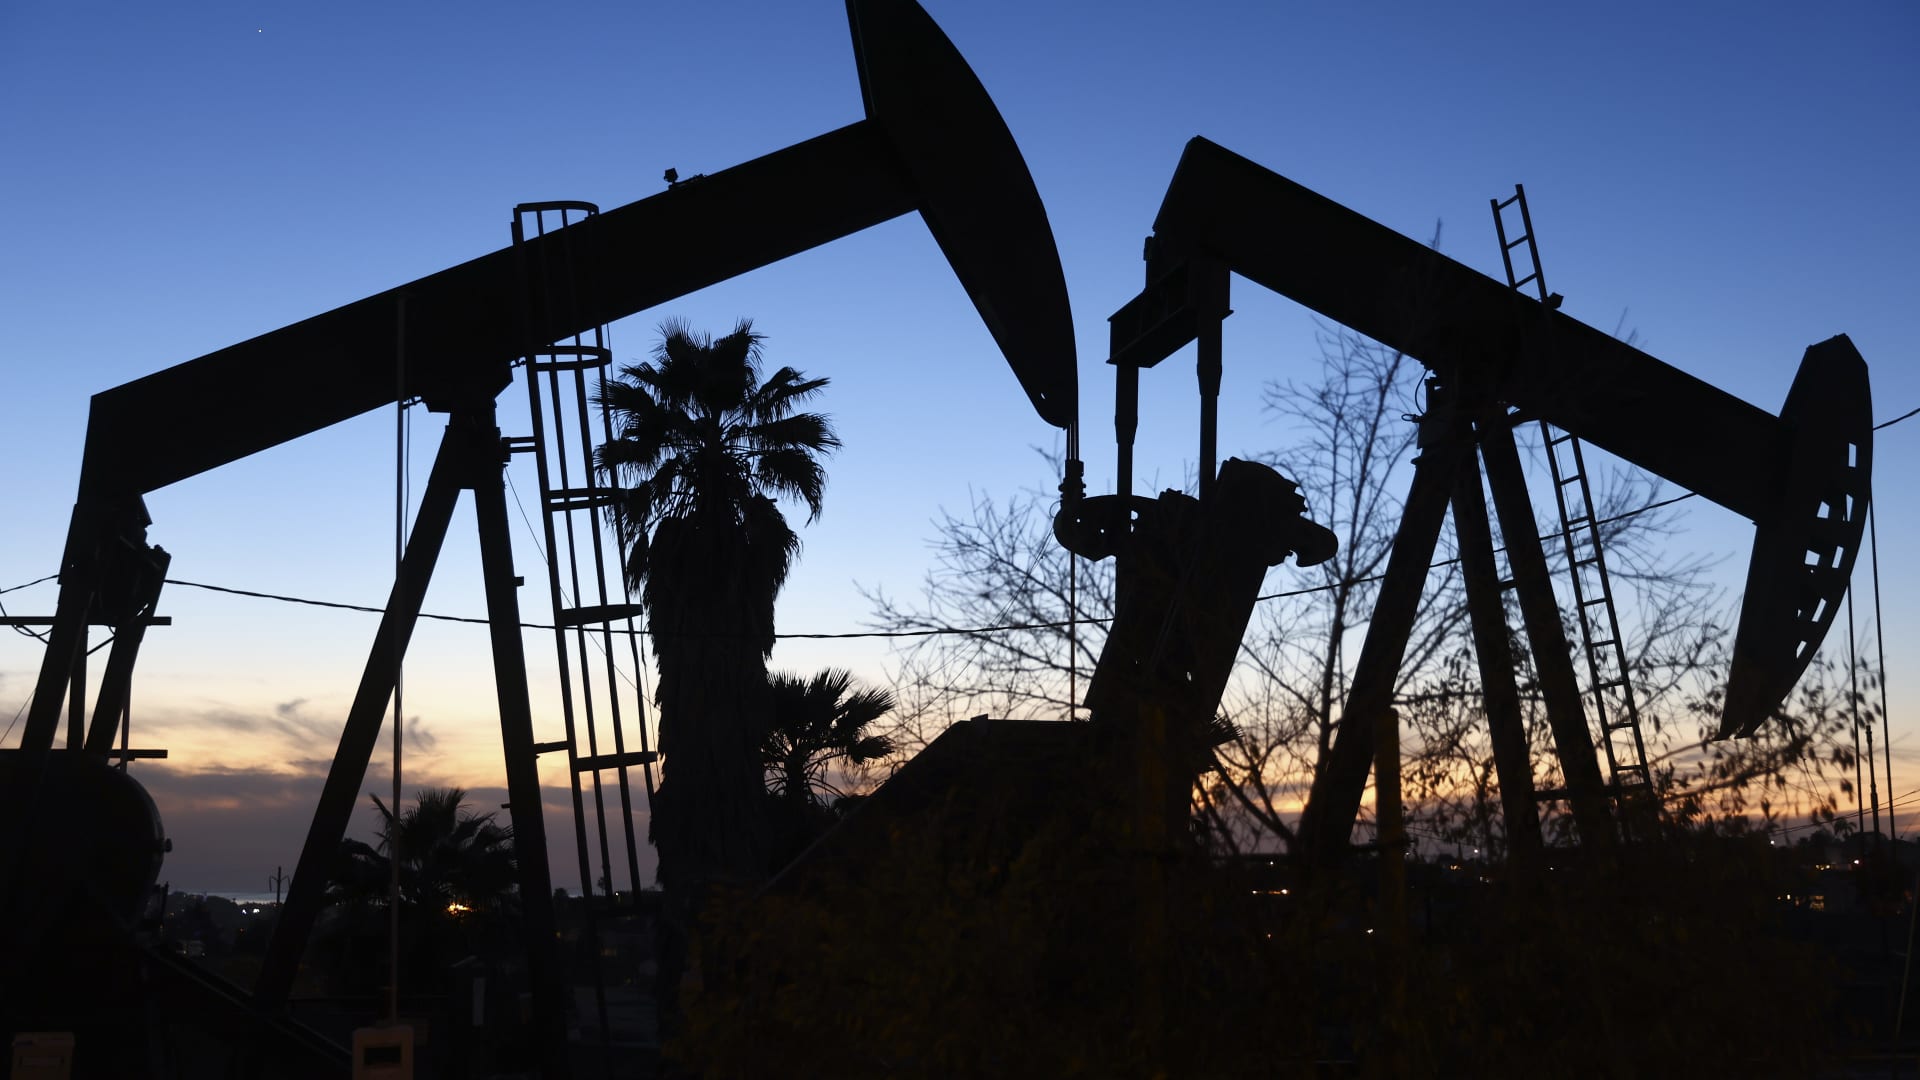 An oil pumpjack (L) operates as another (R) stands idle in the Inglewood Oil Field on January 28, 2022 in Los Angeles, California.